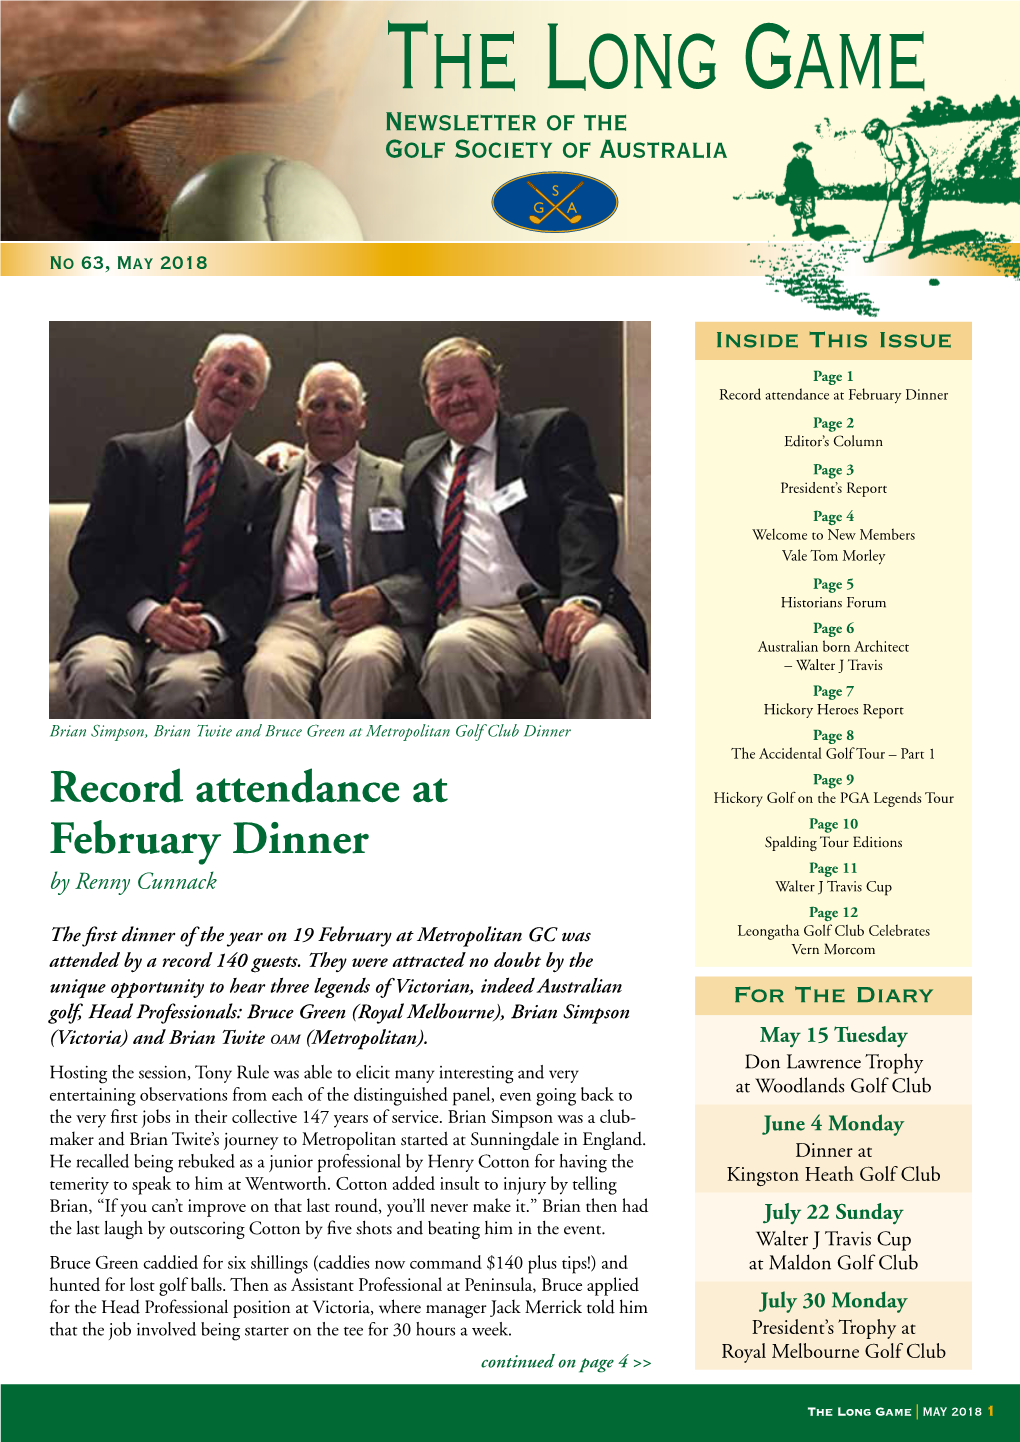 Record Attendance at February Dinner